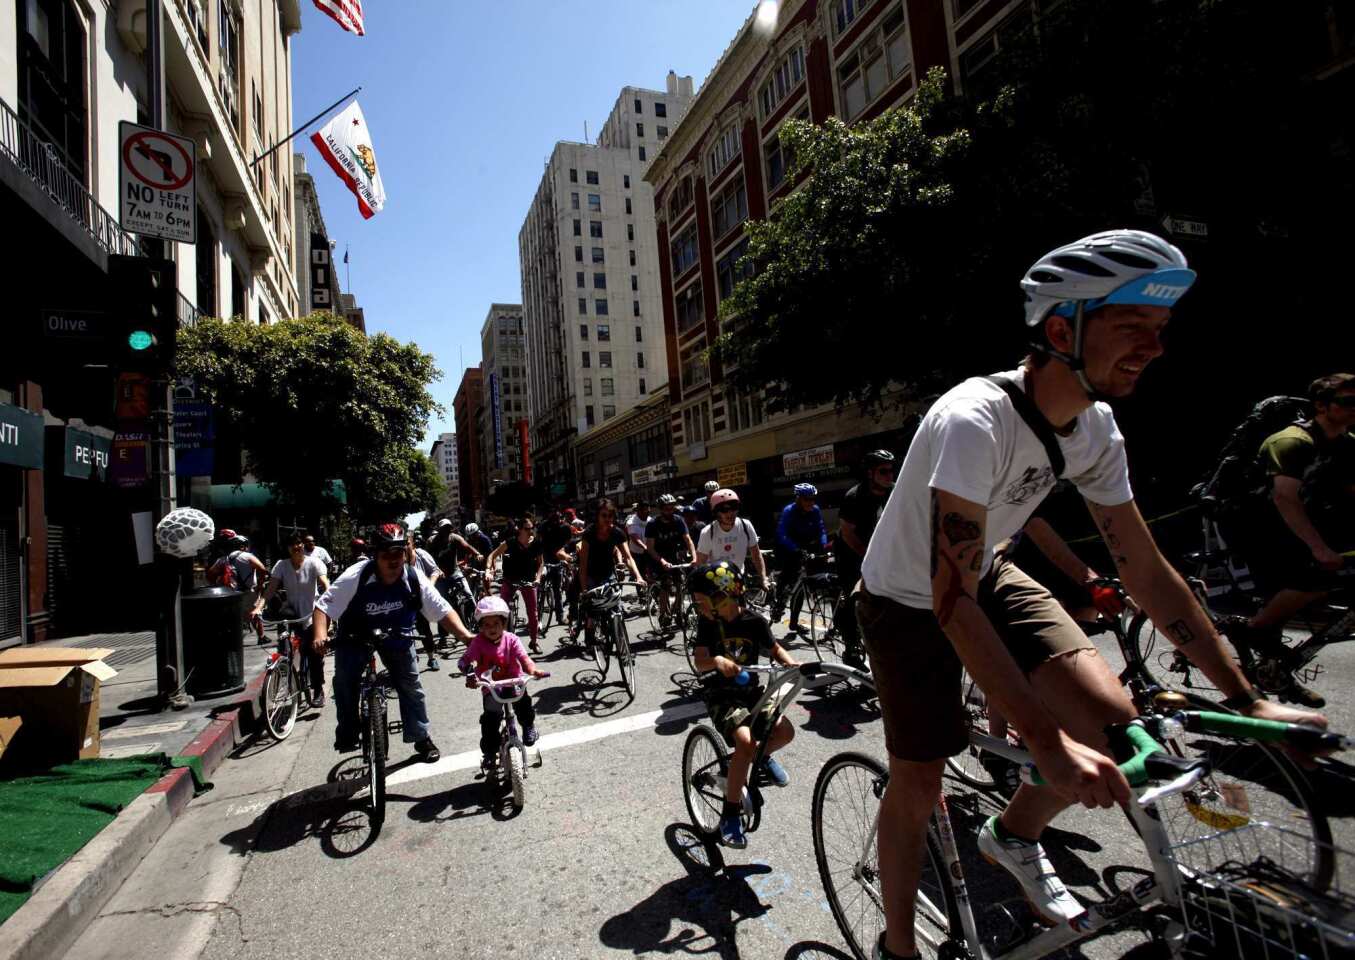 Riders make their way west on 7th Street in downtown Los Angeles during the 4th Annual CicLAvia on April 15, 2012. Inspired by Ciclovia, the original weekly street closure event in Bogata, Columbia, CicLAvia opens LA streets to bicyclists and pedestrians, creating a temporary web of public space.